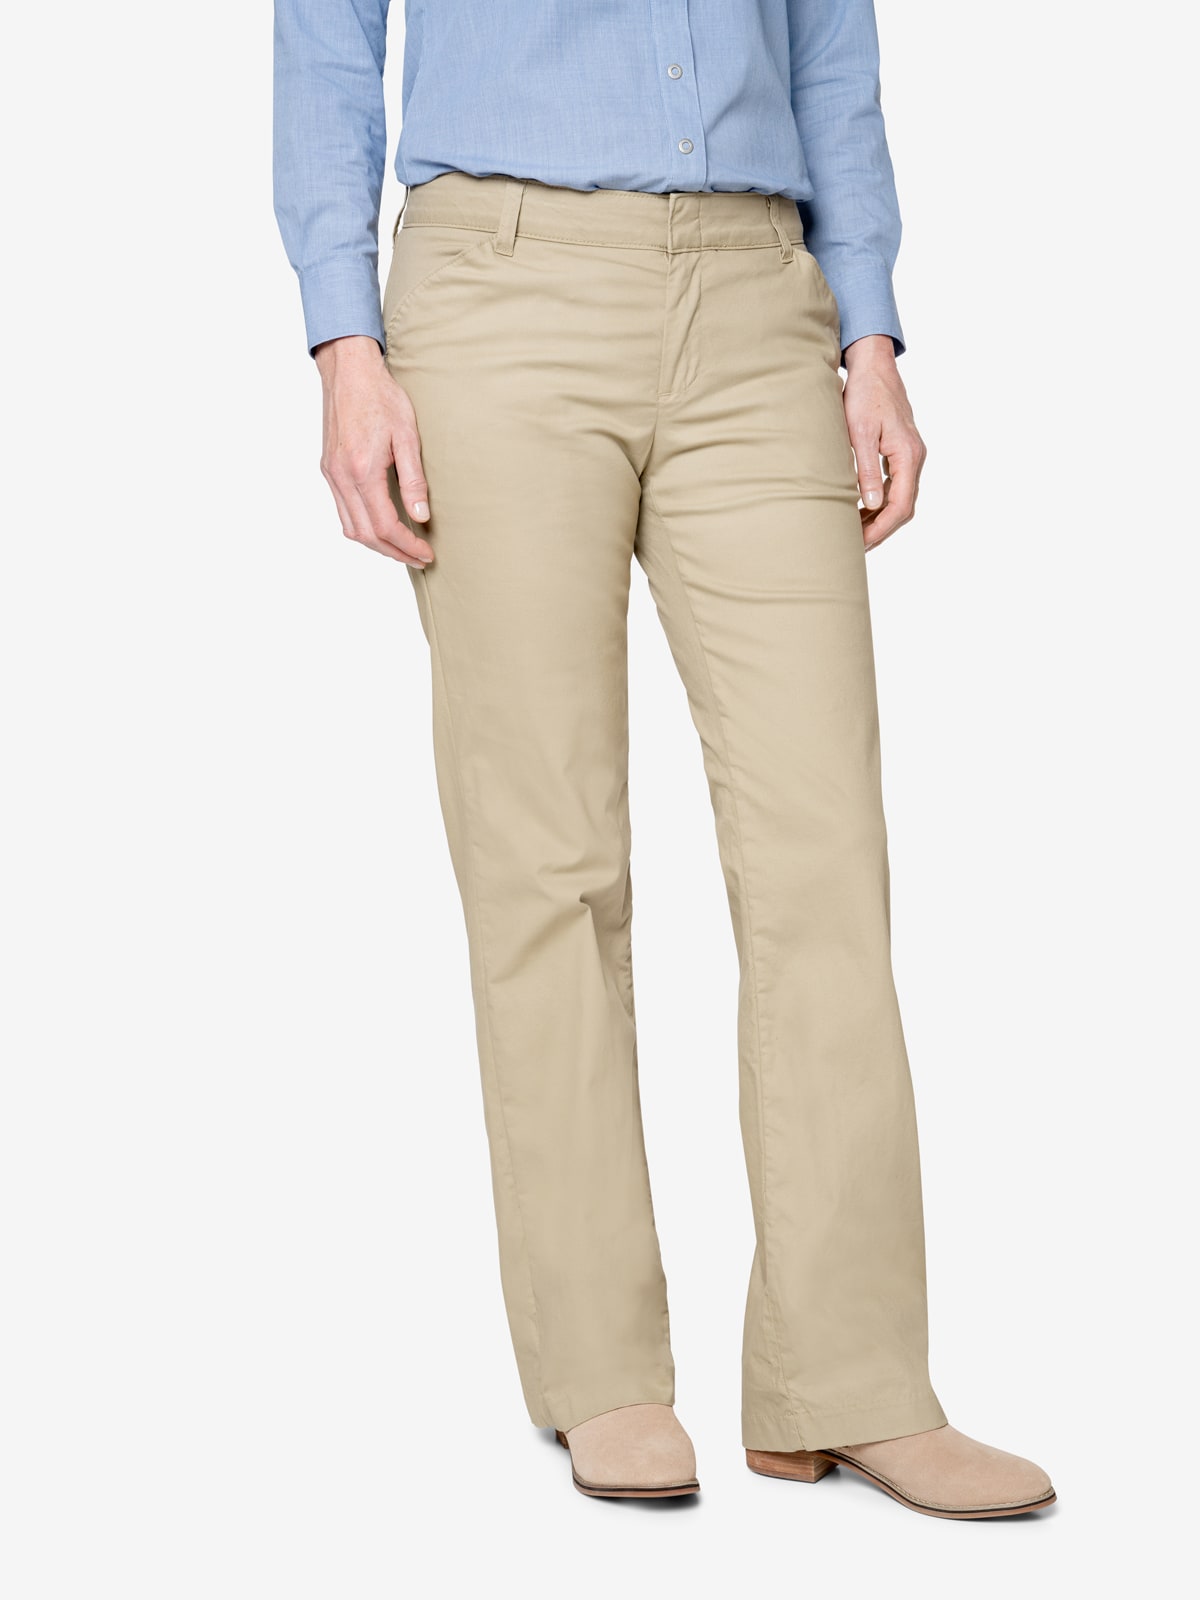 Insect Shield Women's Dockers Weekend Chino Pants